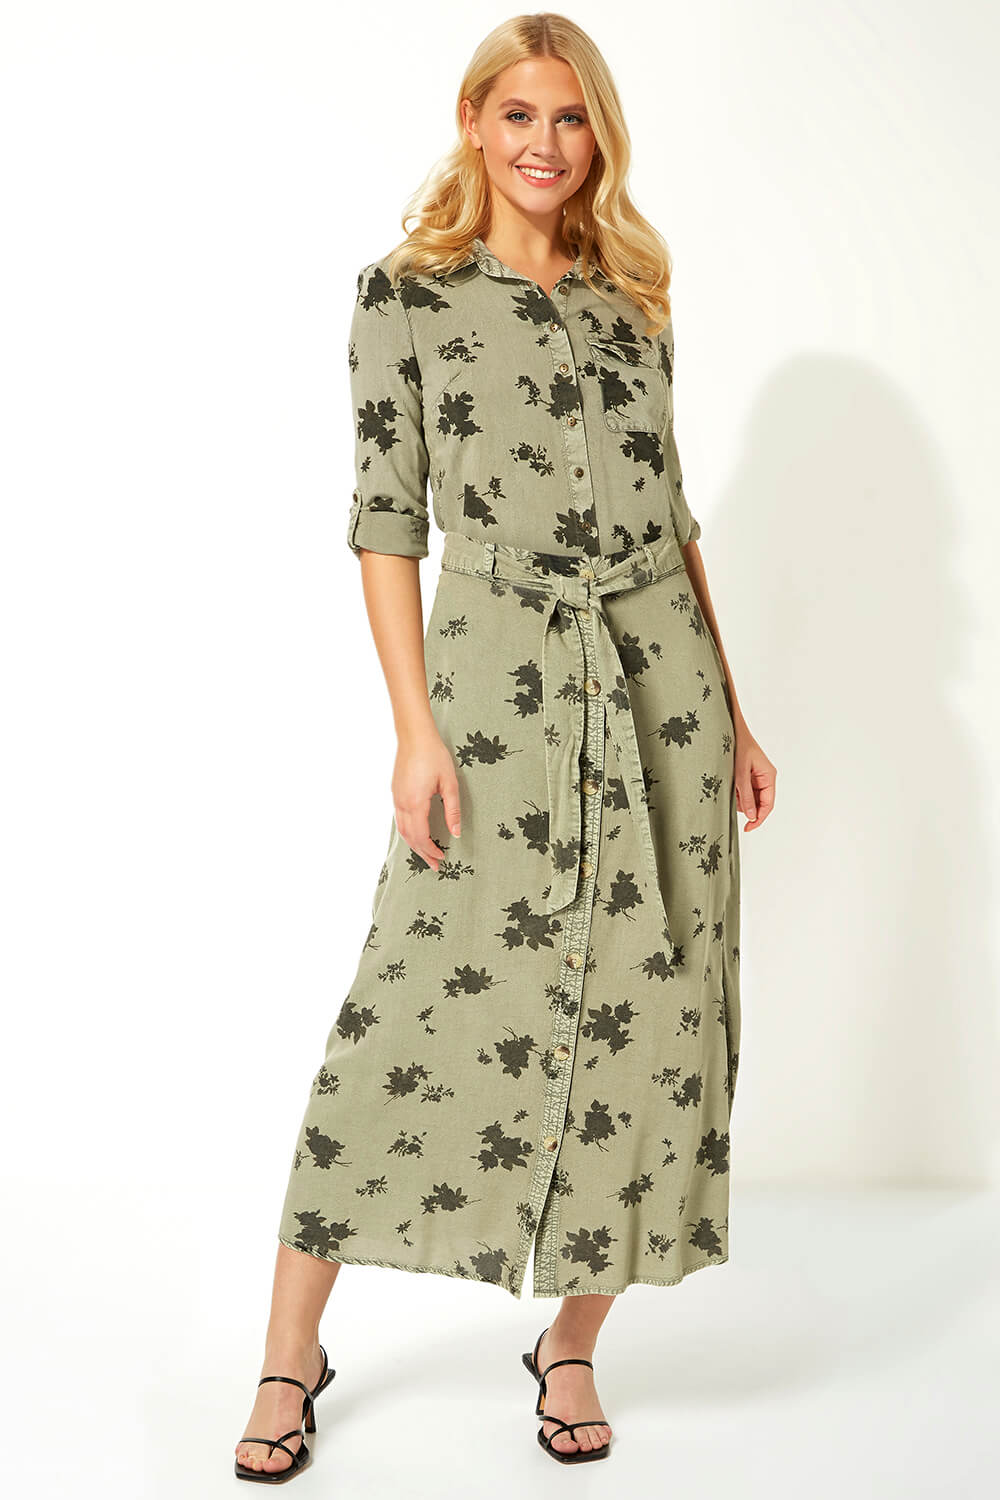 KHAKI Floral Print Button Front Skirt, Image 4 of 5